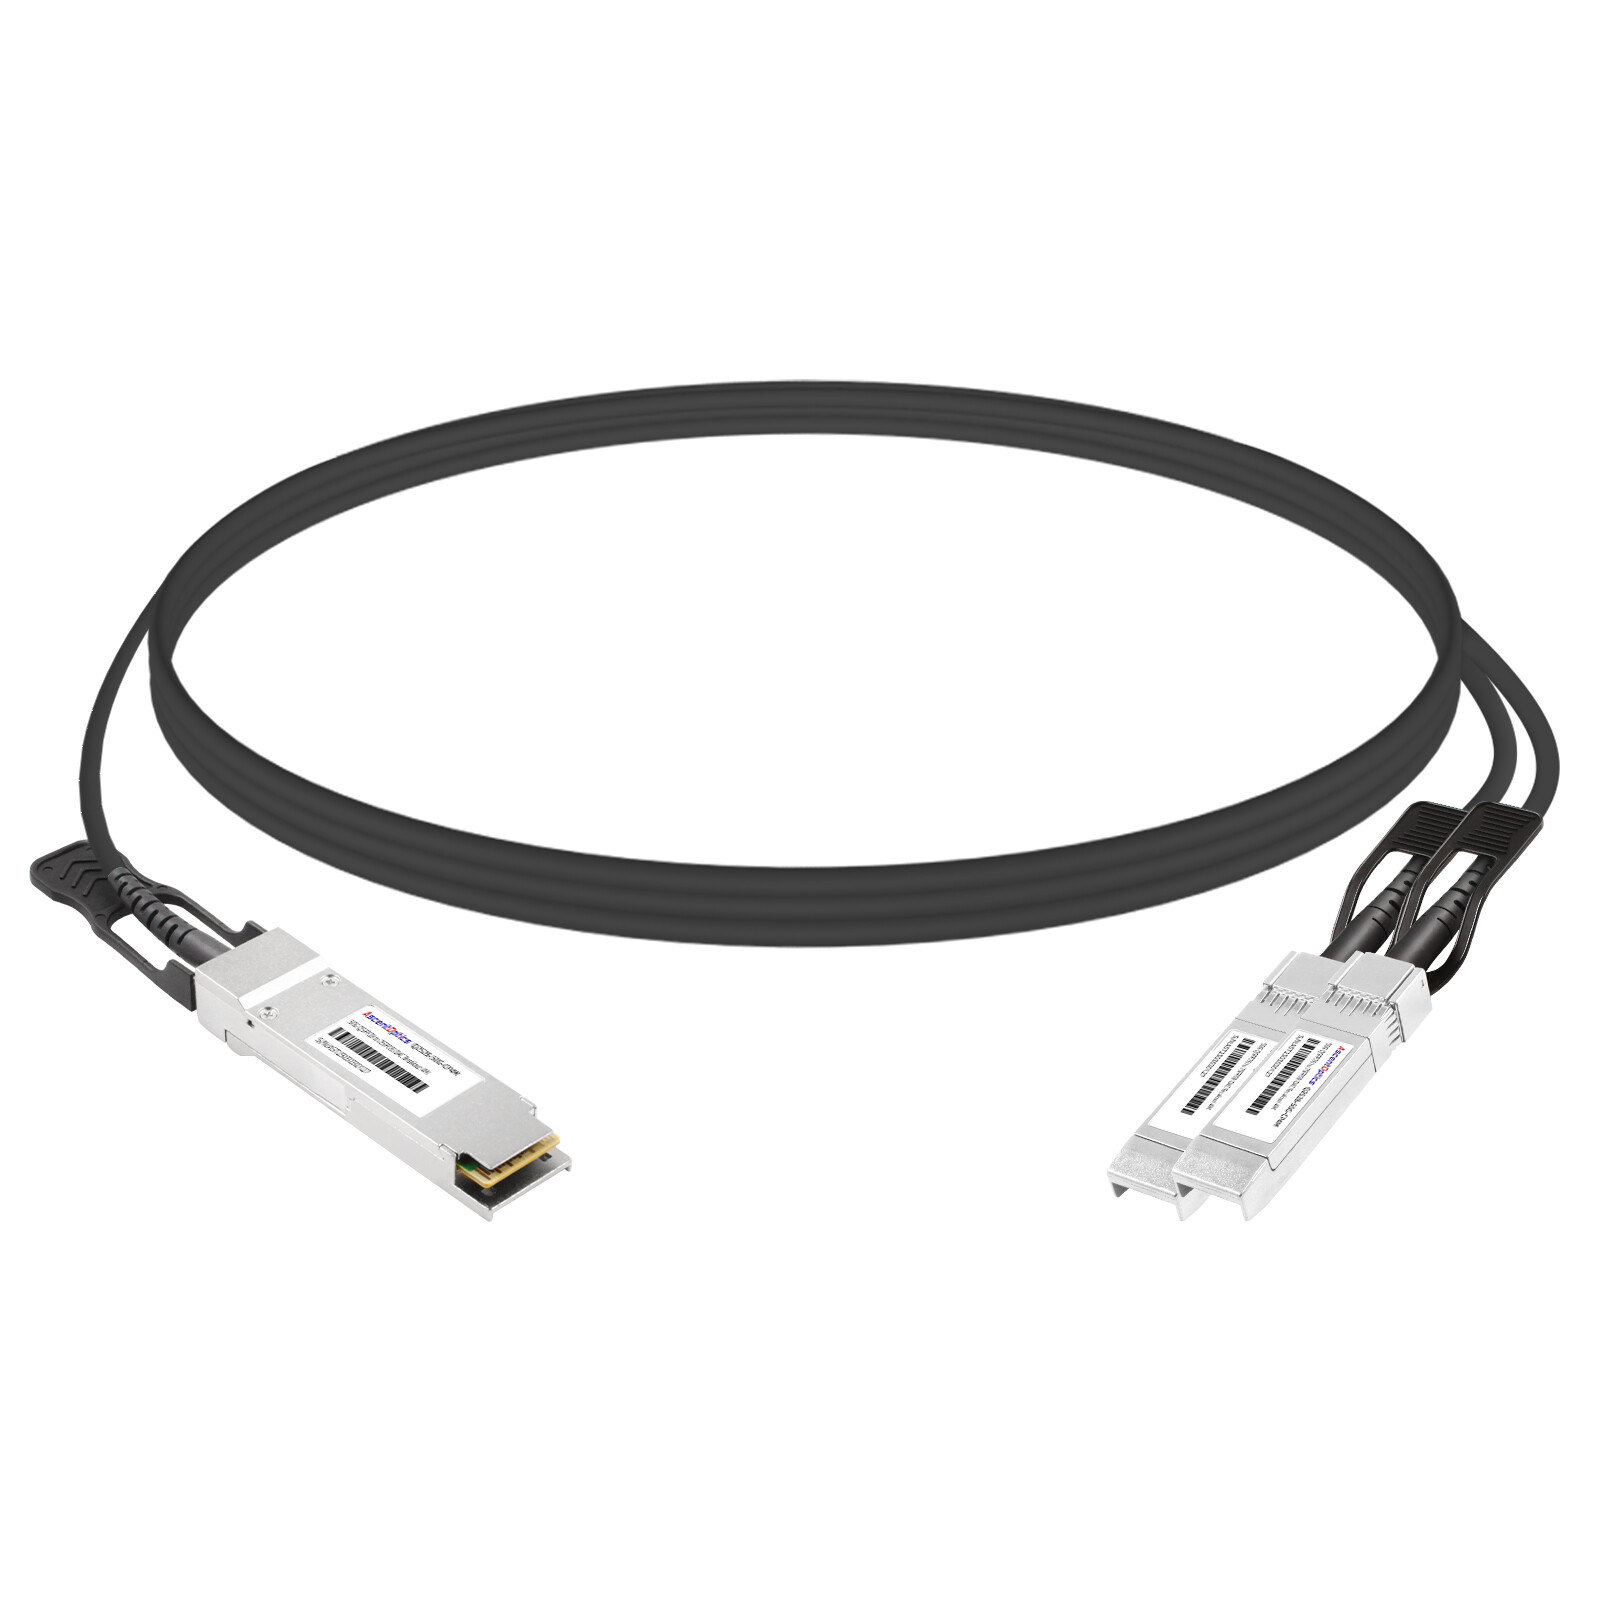 50G QSFP28 to 2x 25G SFP28 Copper Breakout Cable,4 Meters,Passive